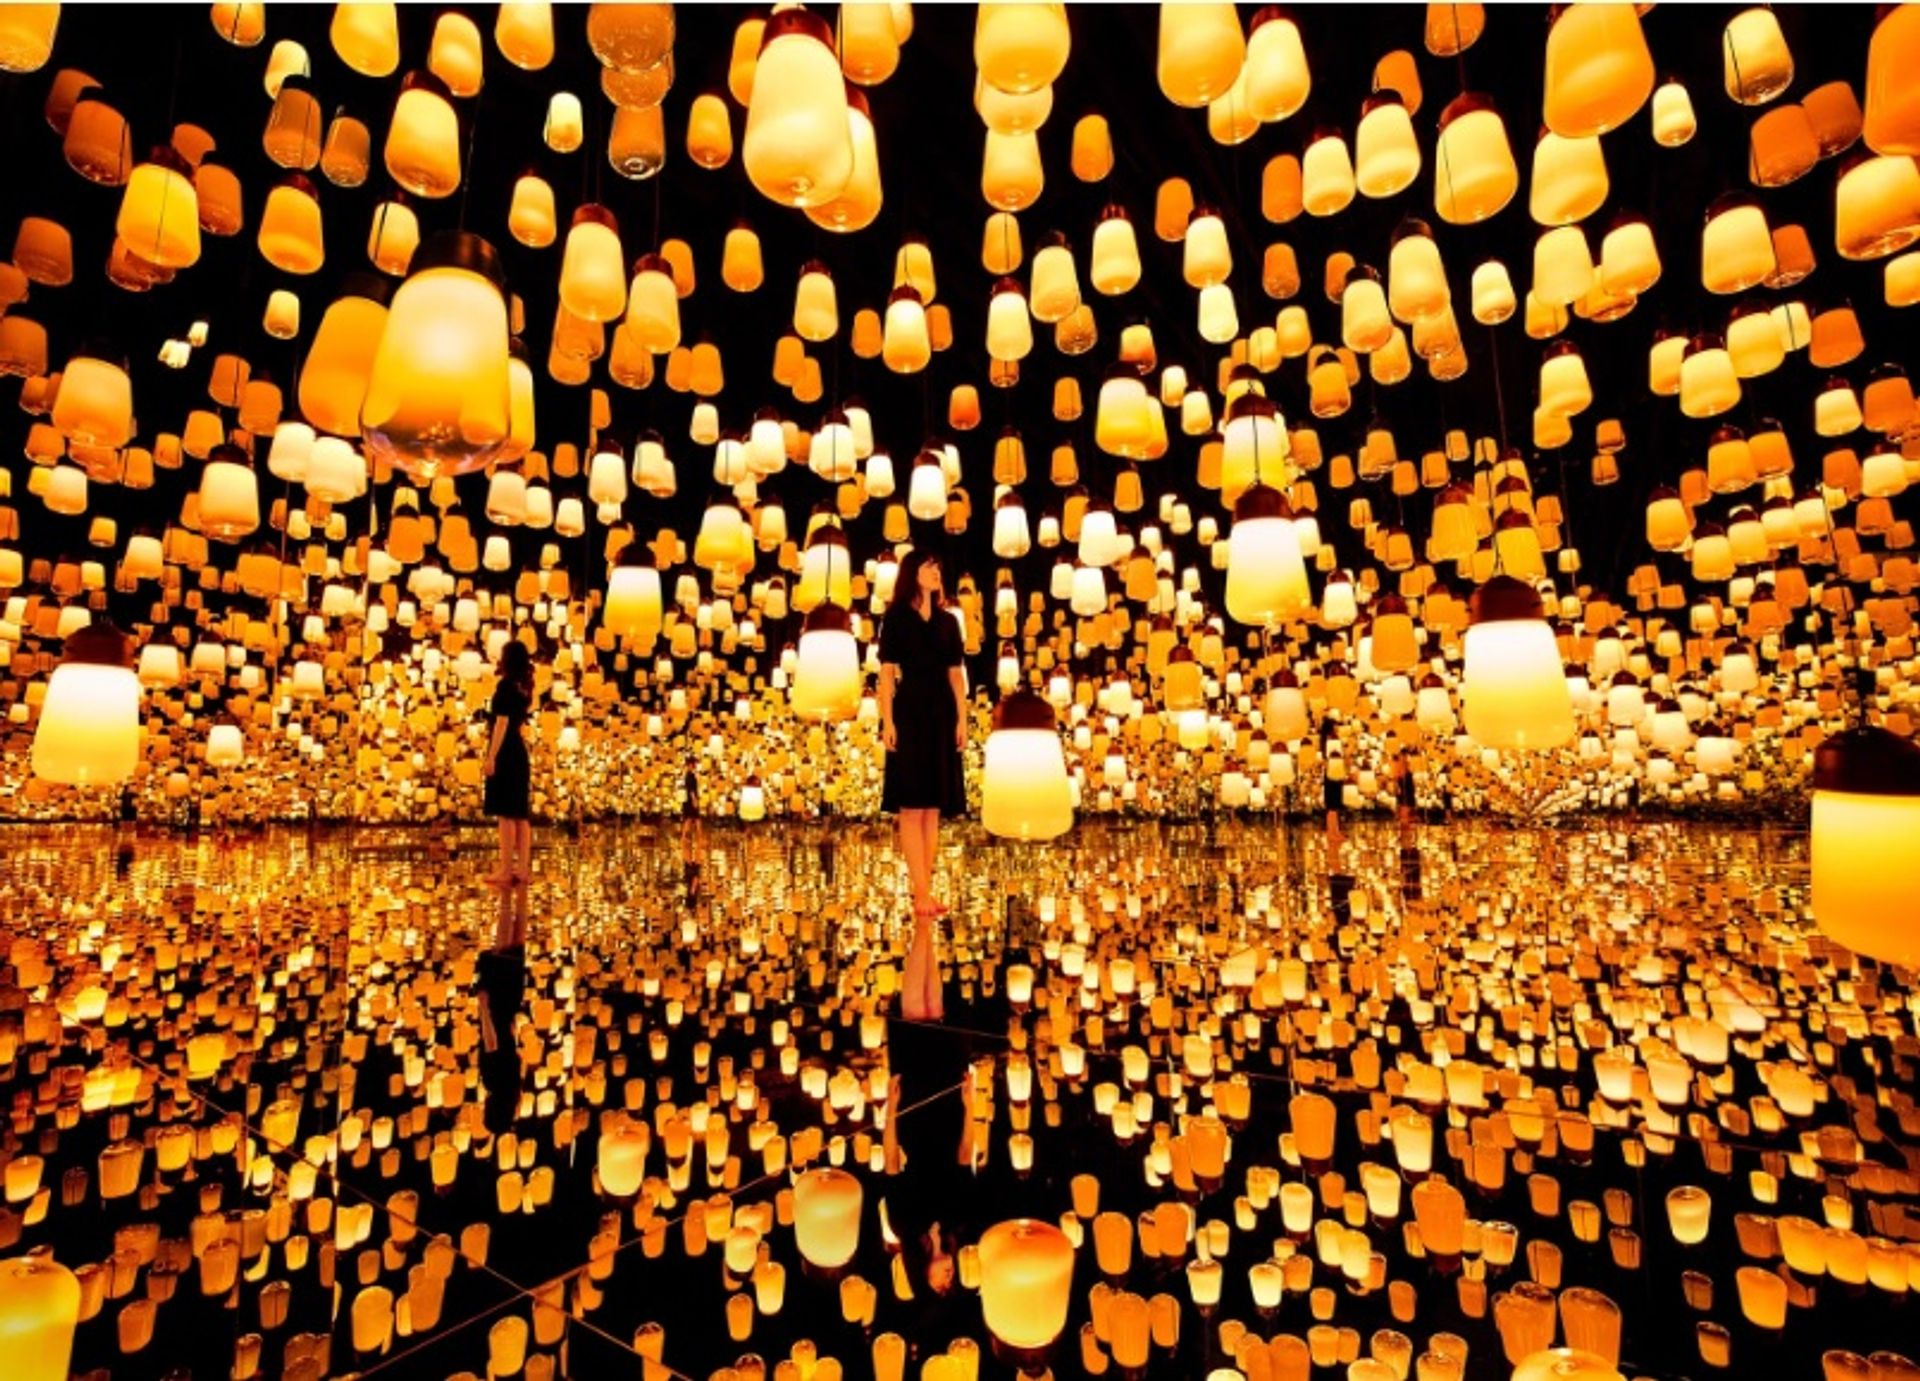  teamLab:  'Forest of Resonating Lamps – Fire'

© teamLab